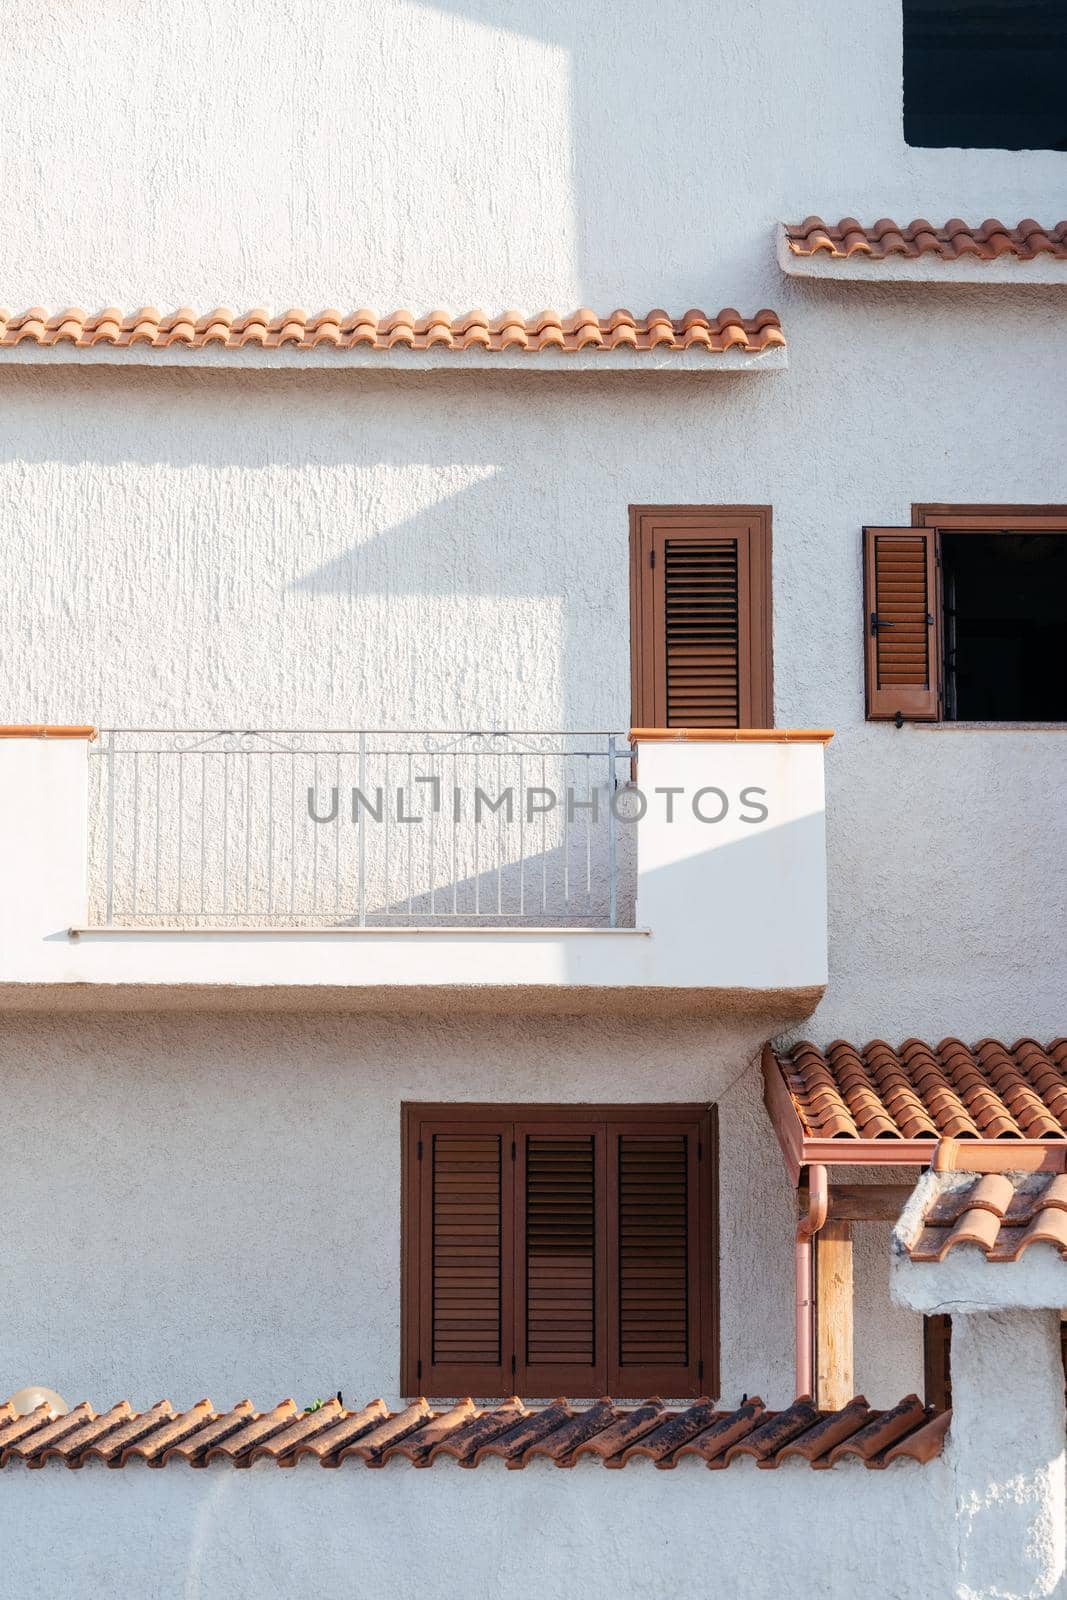 Typical white house facade part in italian city near the sea. Mediterranean village style architecture. by photolime